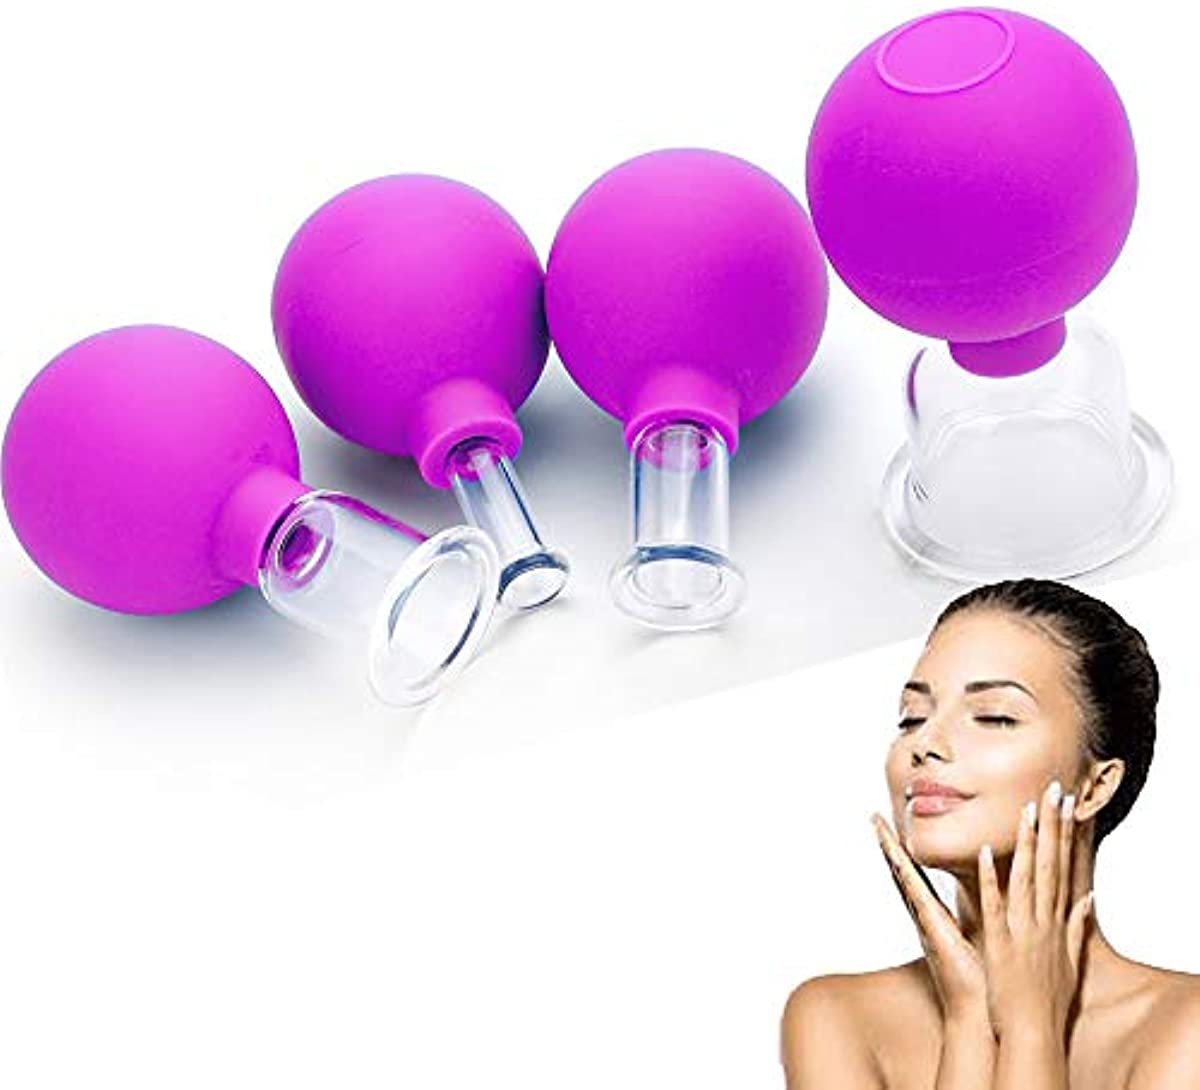 Glass Facial Cupping Set- 4pcs Silicone Vacuum Suction Face Massage Cups Anti Cellulite Lymphatic Therapy Sets for Eyes, Face and Body (Rose red)